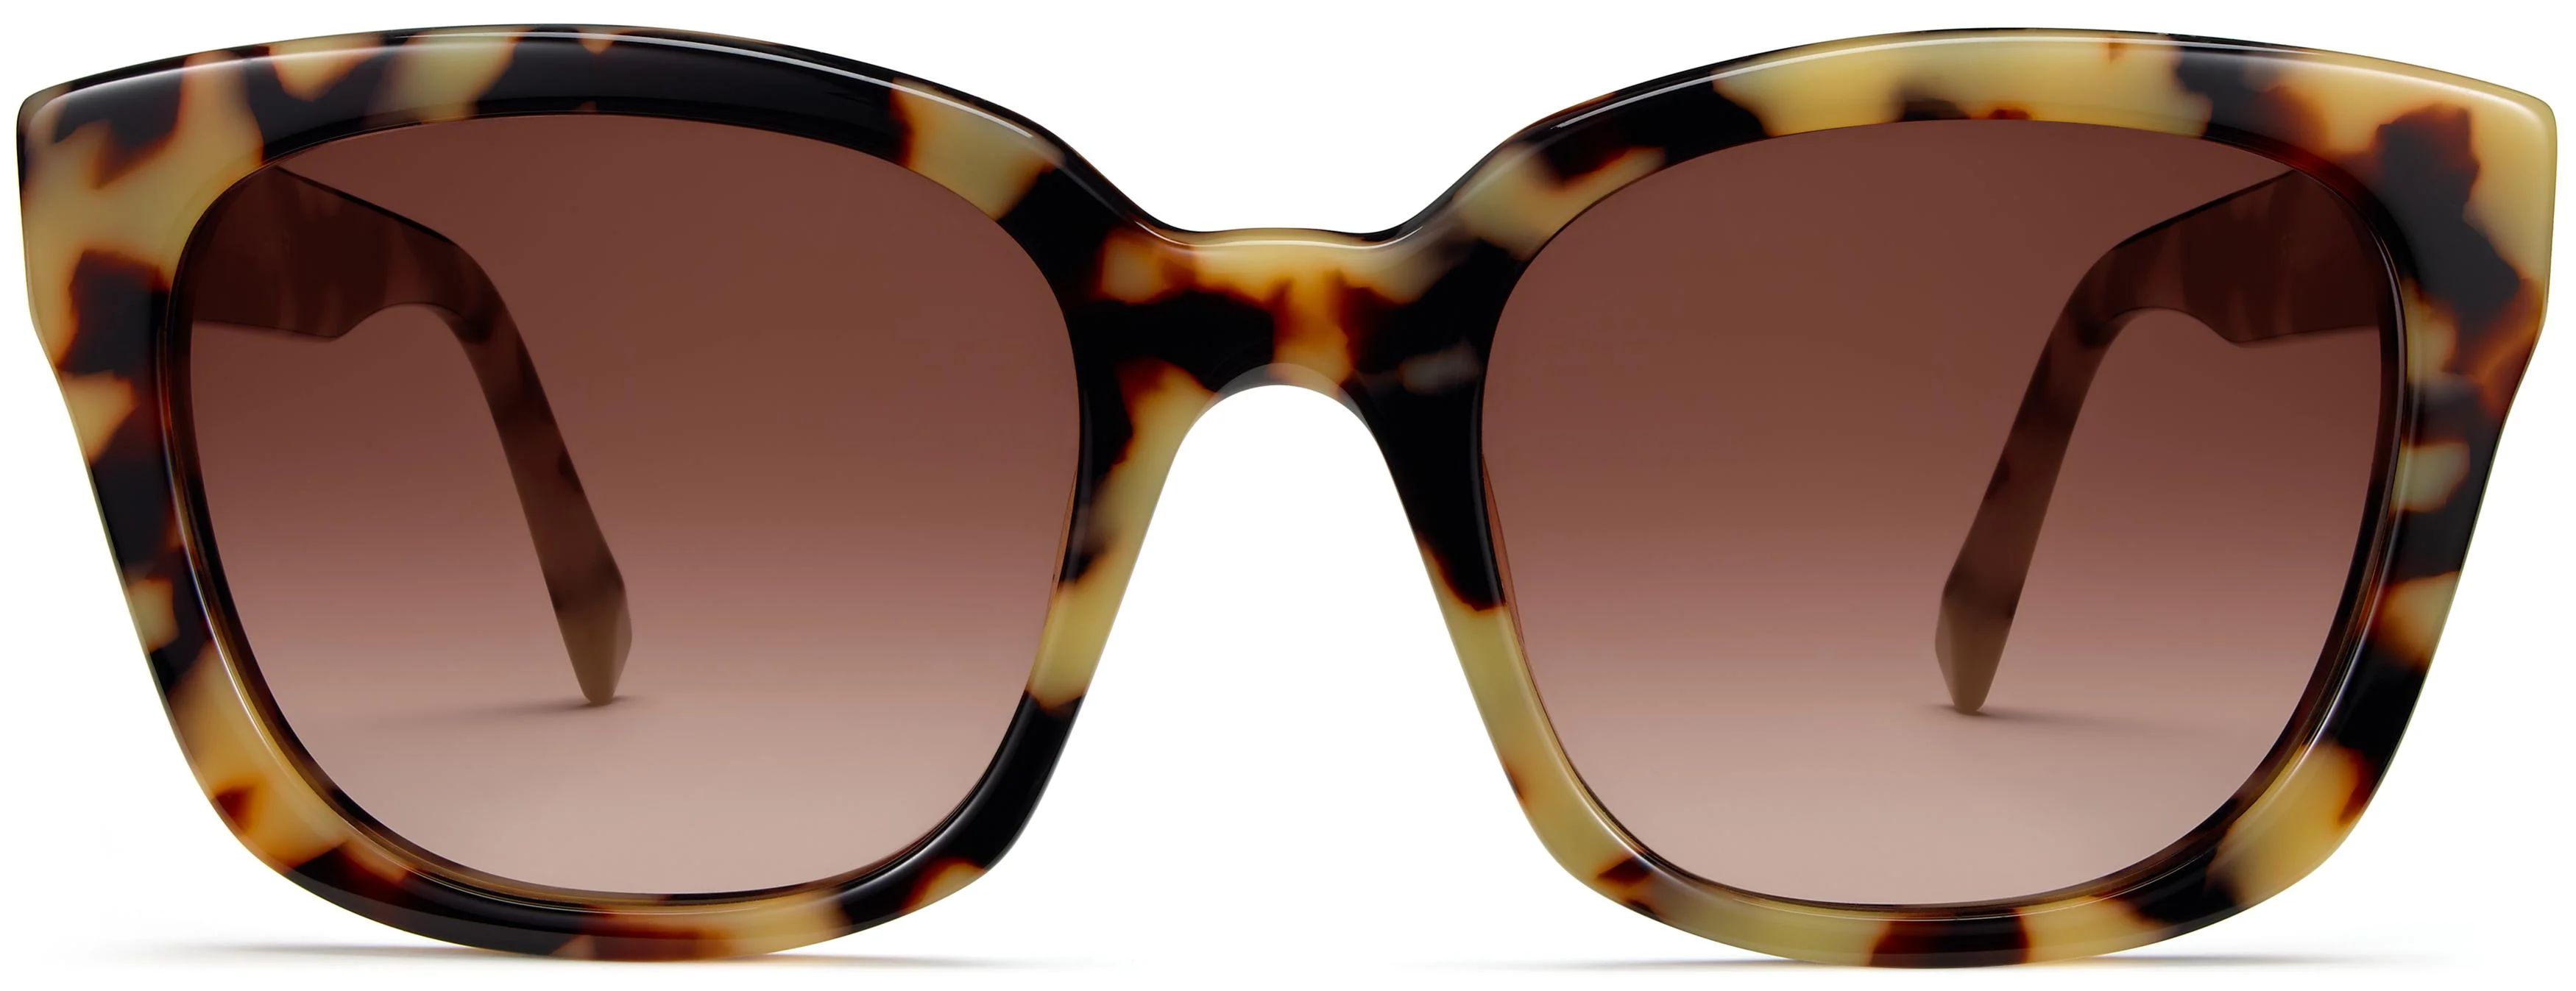 Aubrey Sunglasses in Marzipan Tortoise | Warby Parker (US)